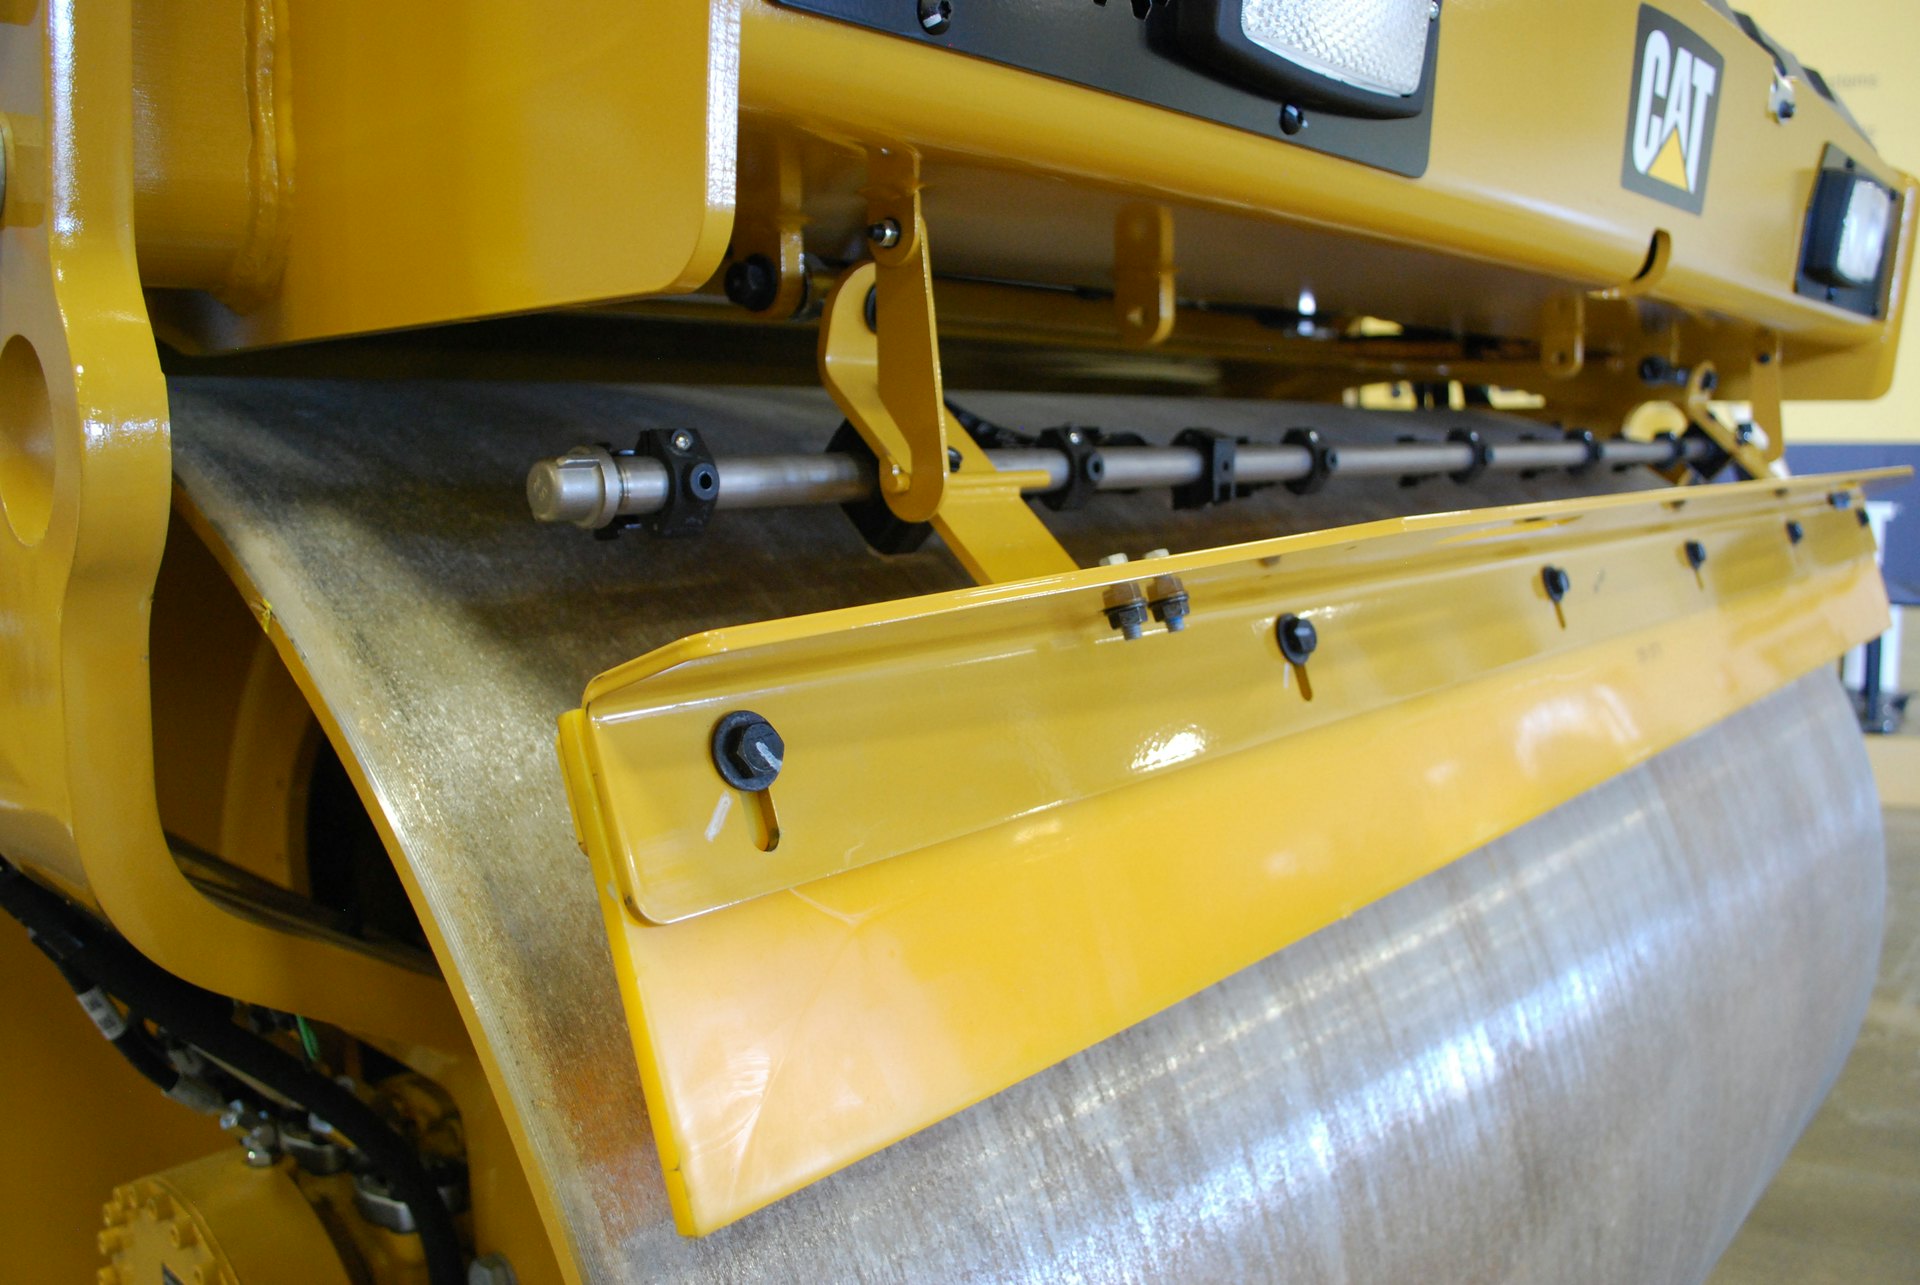 3 Tips to Maintain Vibratory Rollers and Keep Them on the Asphalt Mat